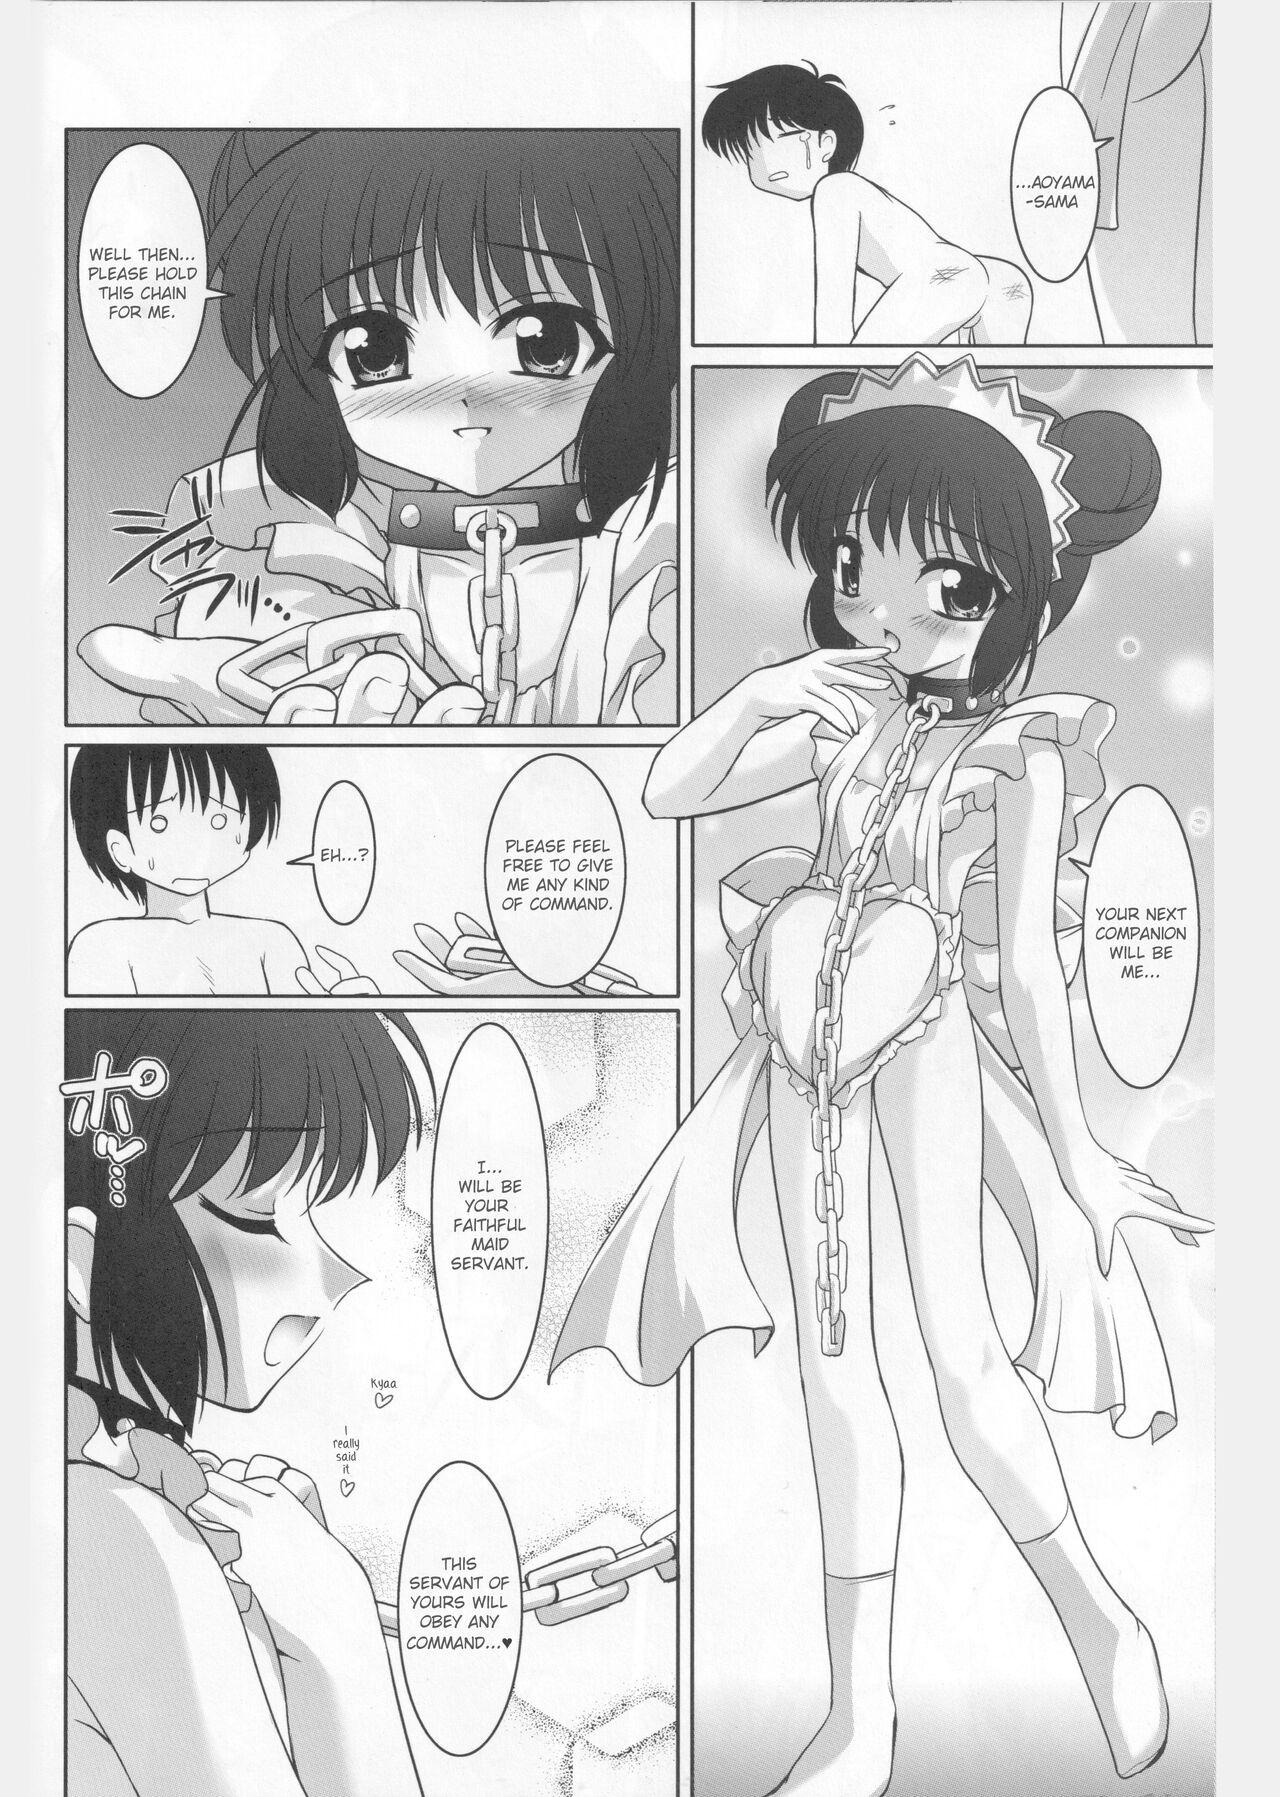 Neighbor Ring My Bell - MAGICALDELTA.COM - Tokyo mew mew | mew mew power Secret - Page 11